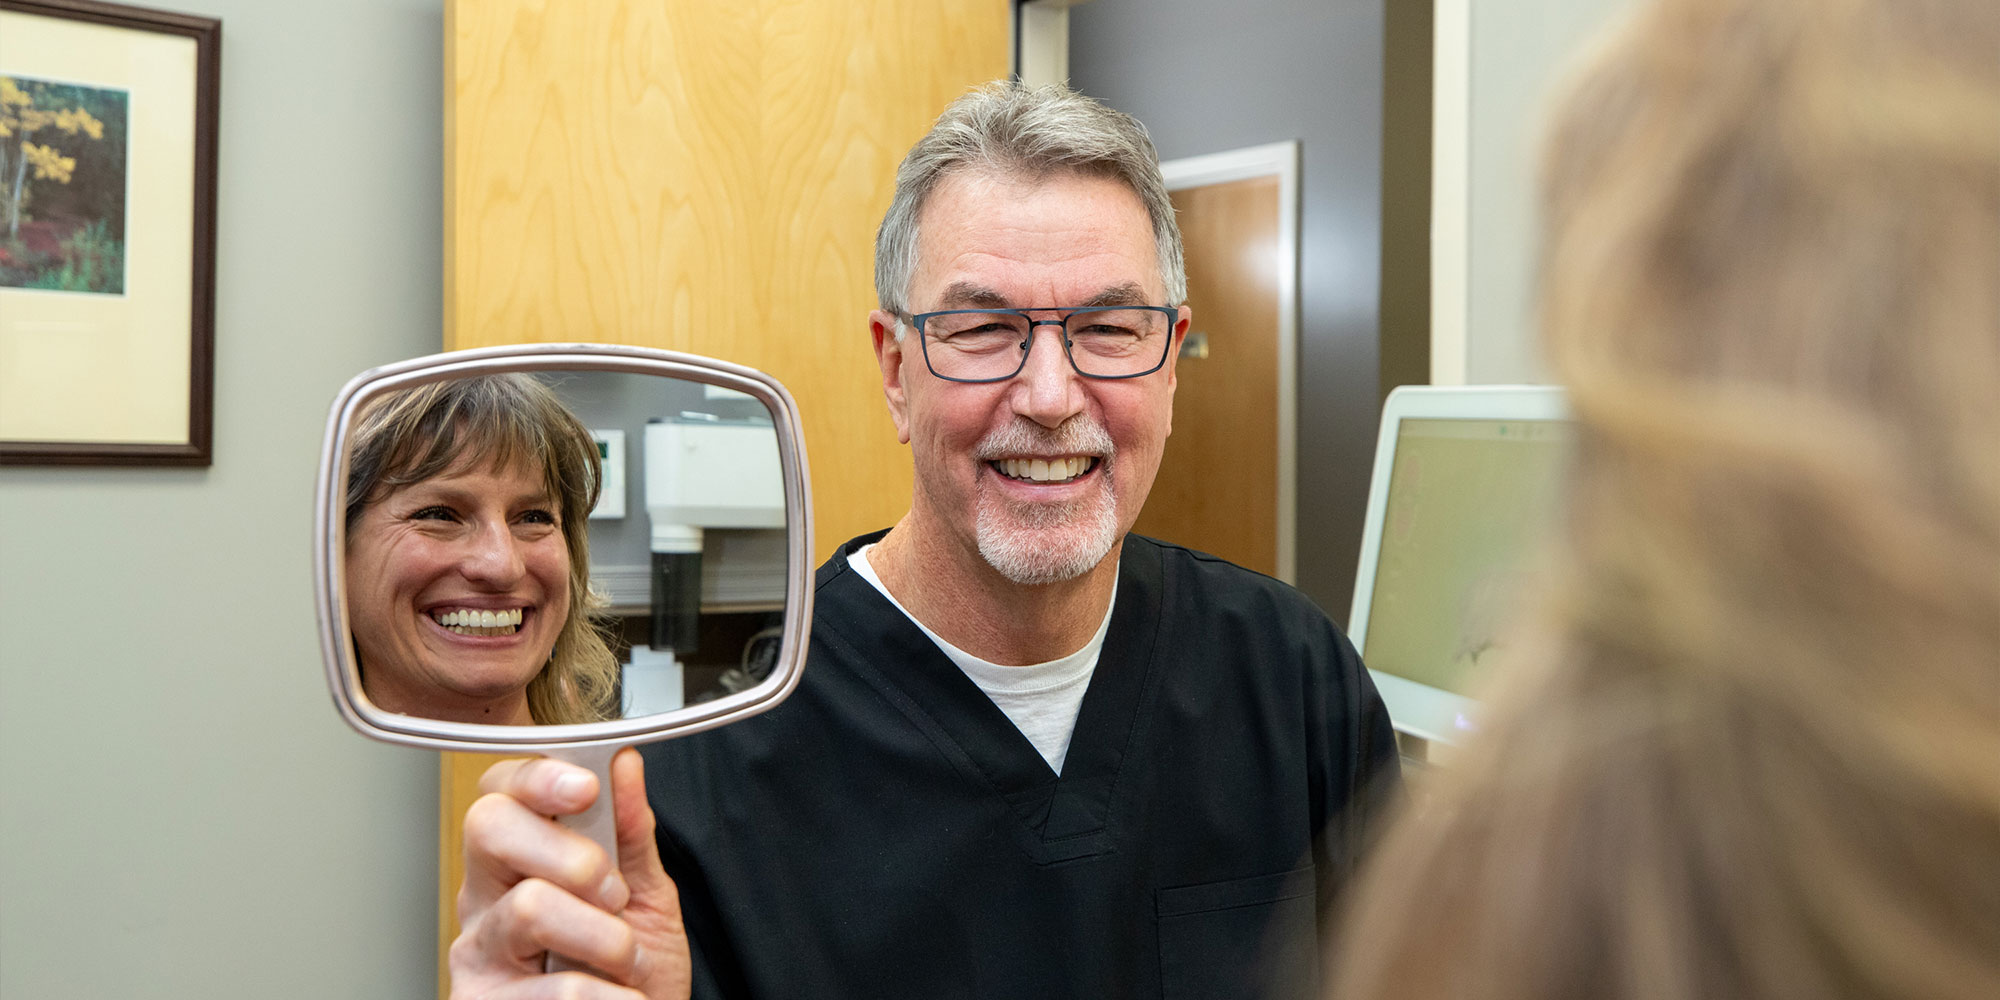 patient being shown mirror and smiling confidently after their dental procedure